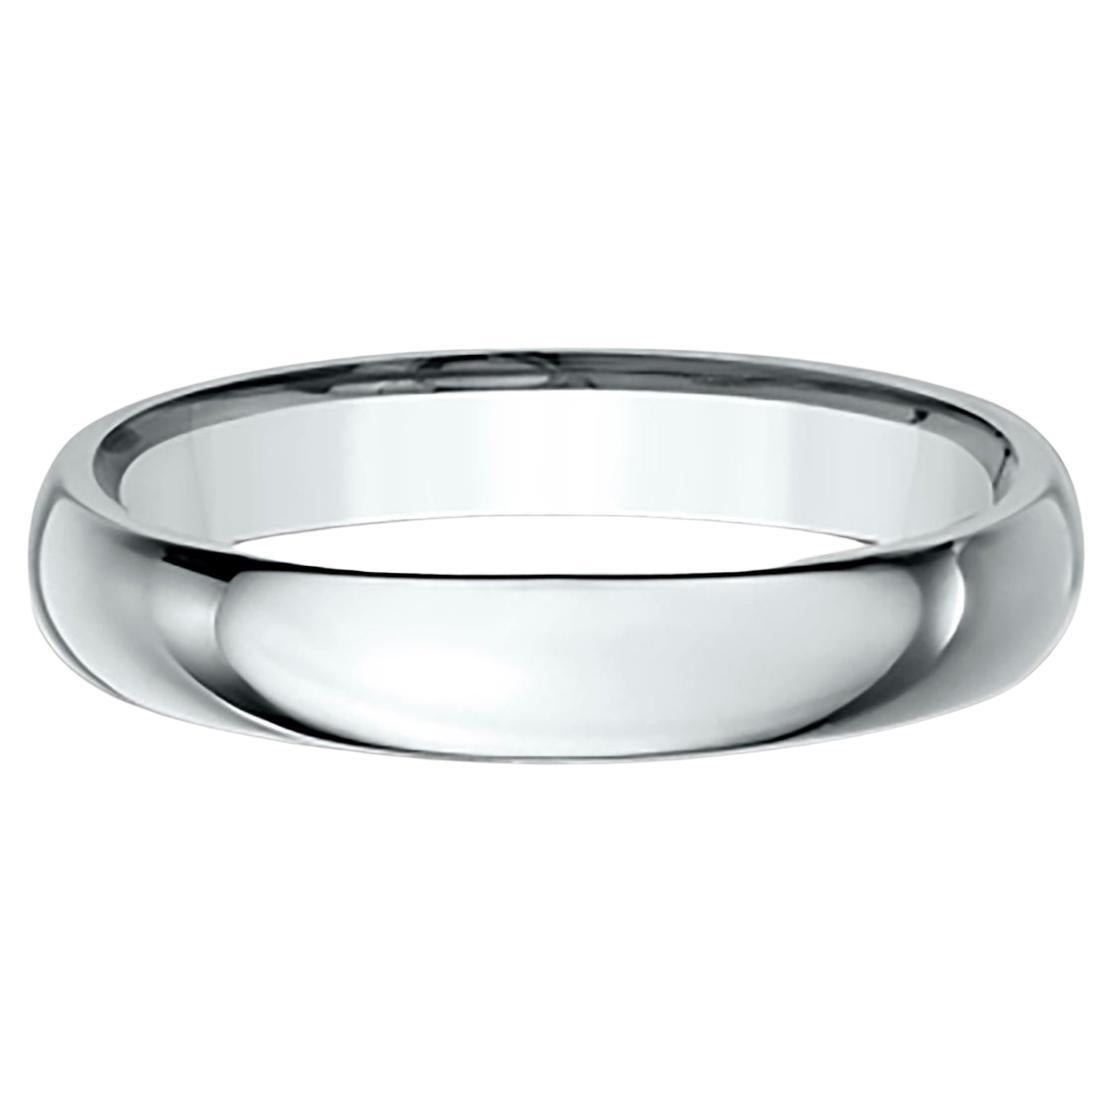 Benchmark Classic Comfort Fit Wedding Band in Platinum, Width 4mm